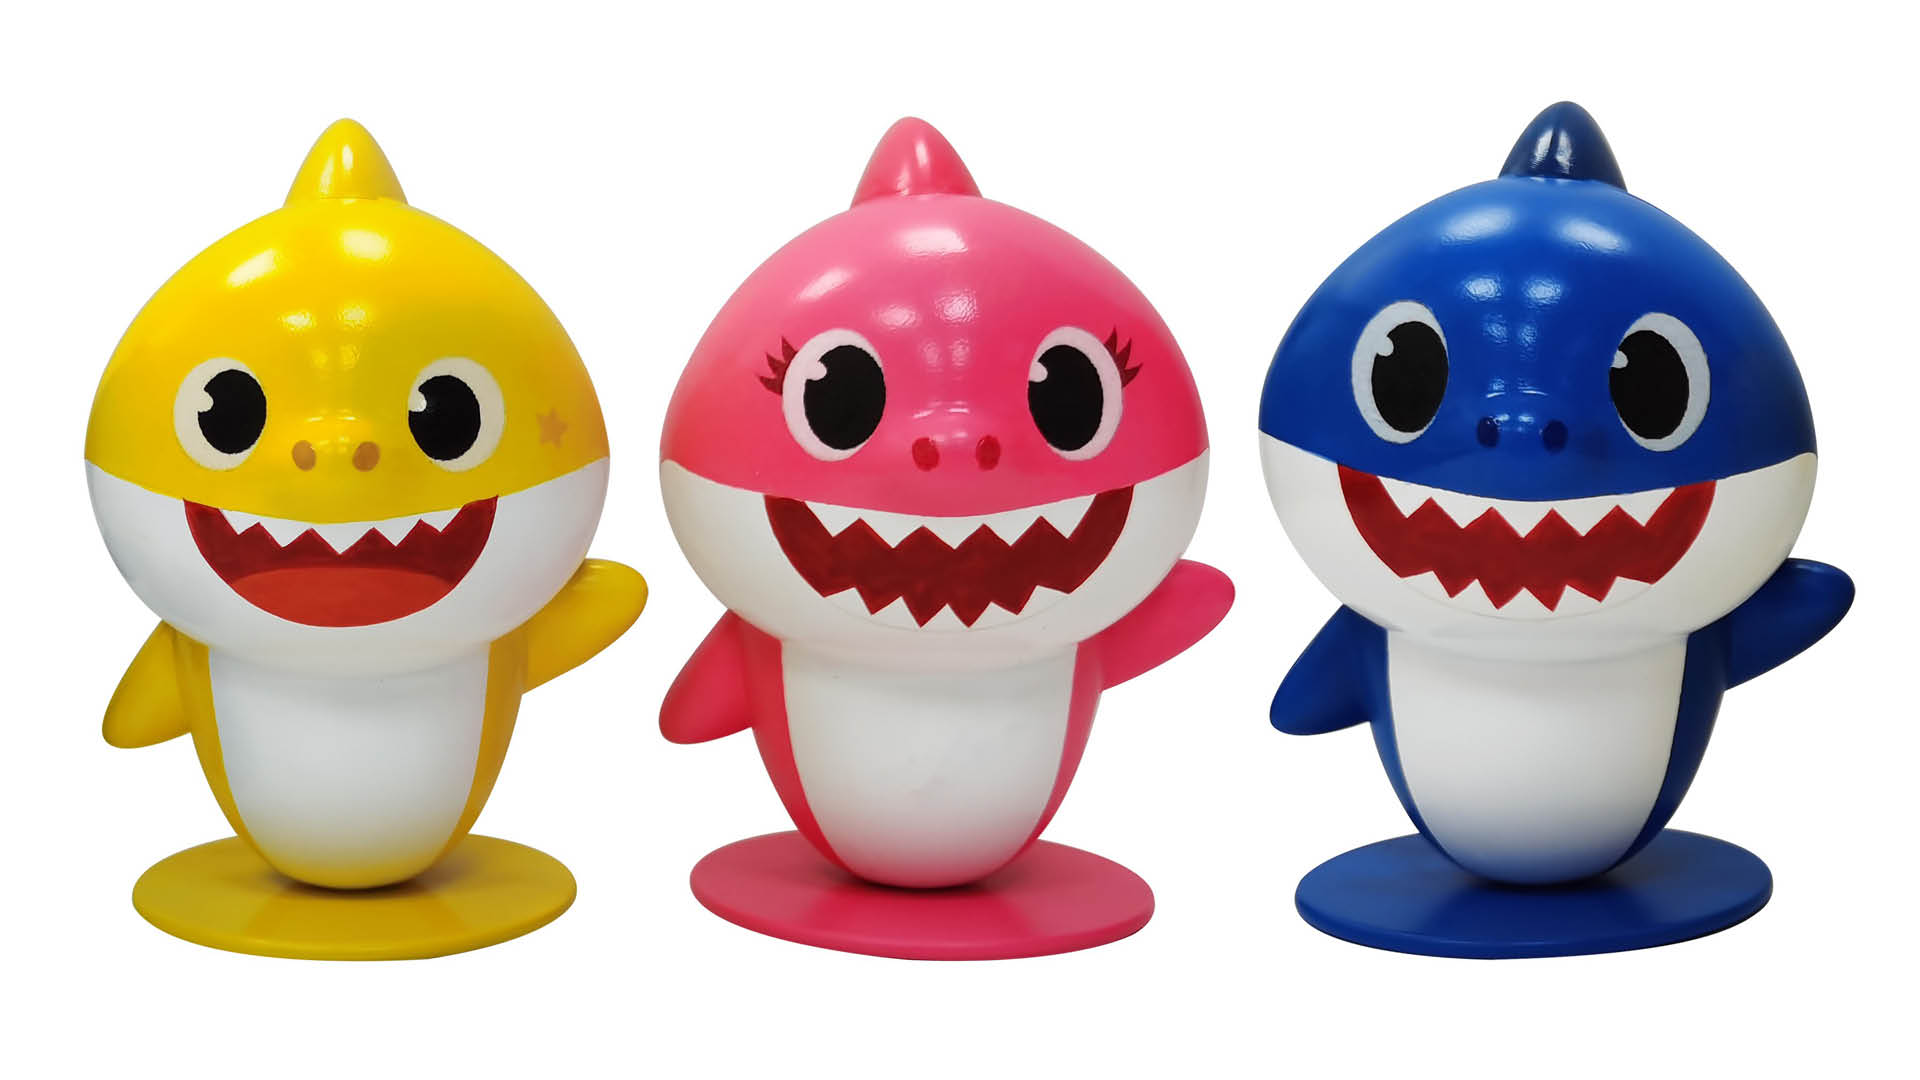 CandyRific Expands Baby Shark-Themed Candy Novelty Offerings